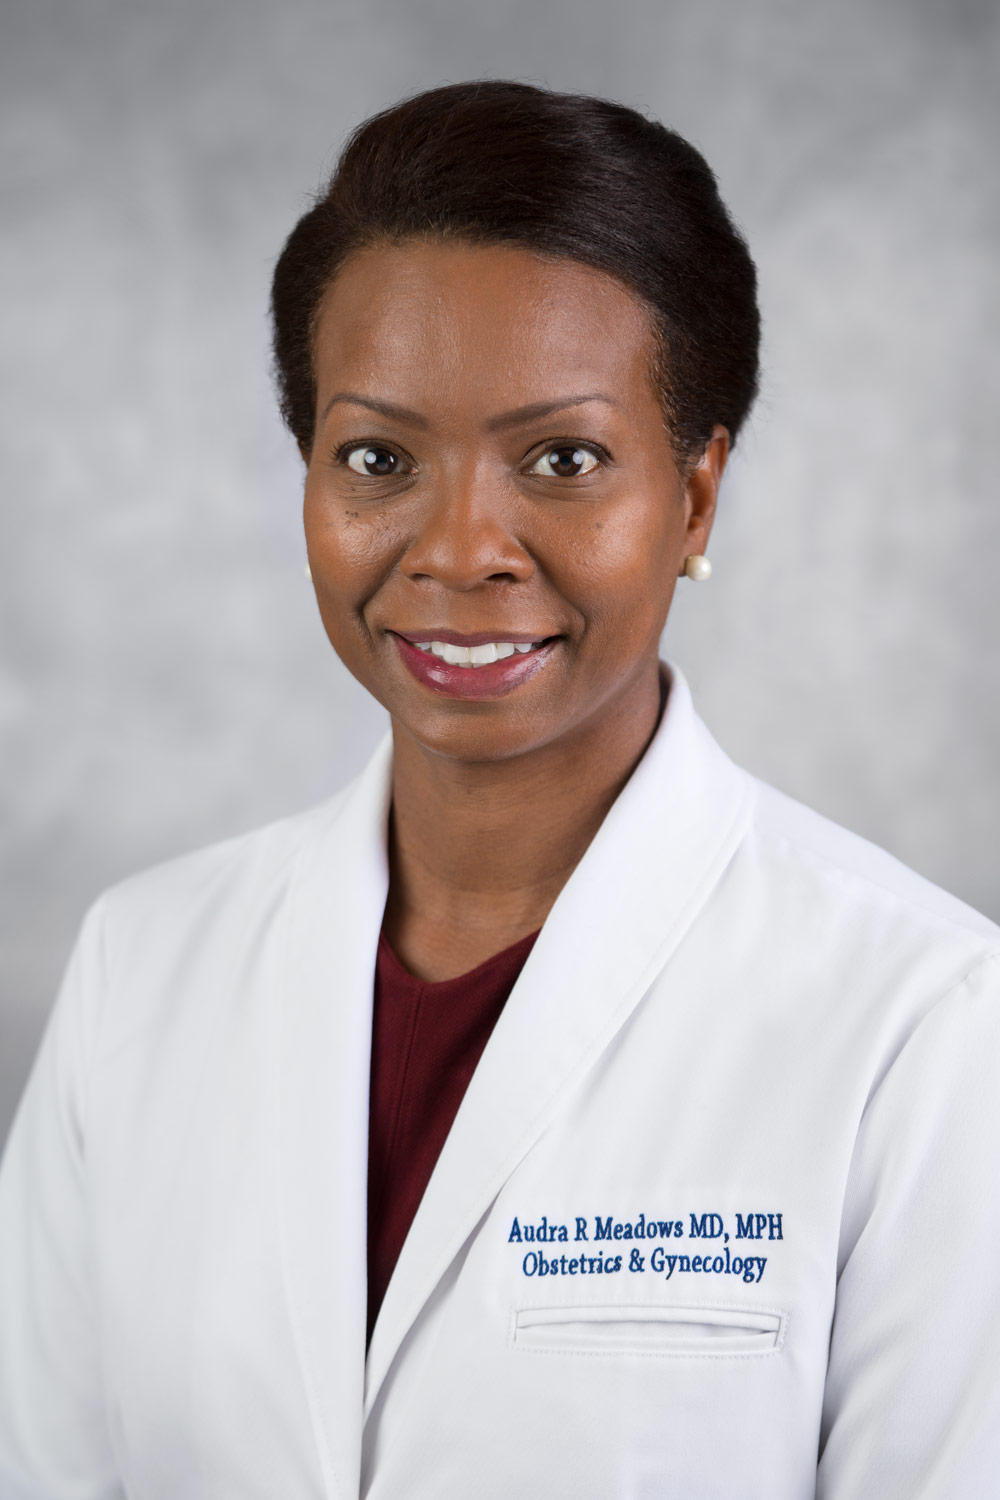 Dr. Audra Robertson Meadows, MD